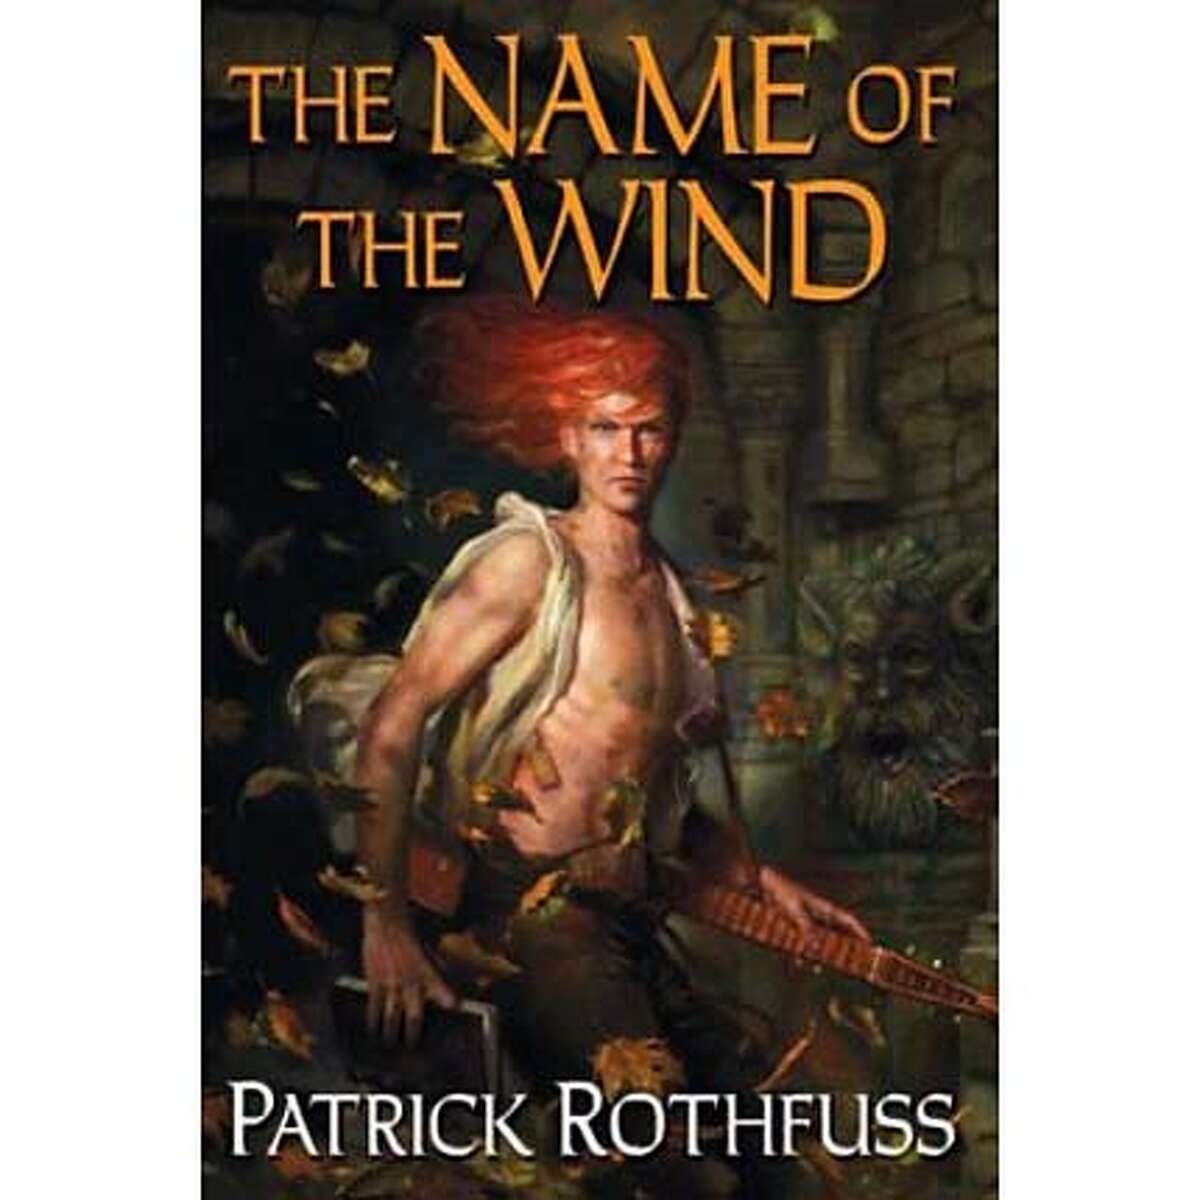 "The Name of the Wind" by Patrick Rothfuss (DAW; 662 pages; $24.95)